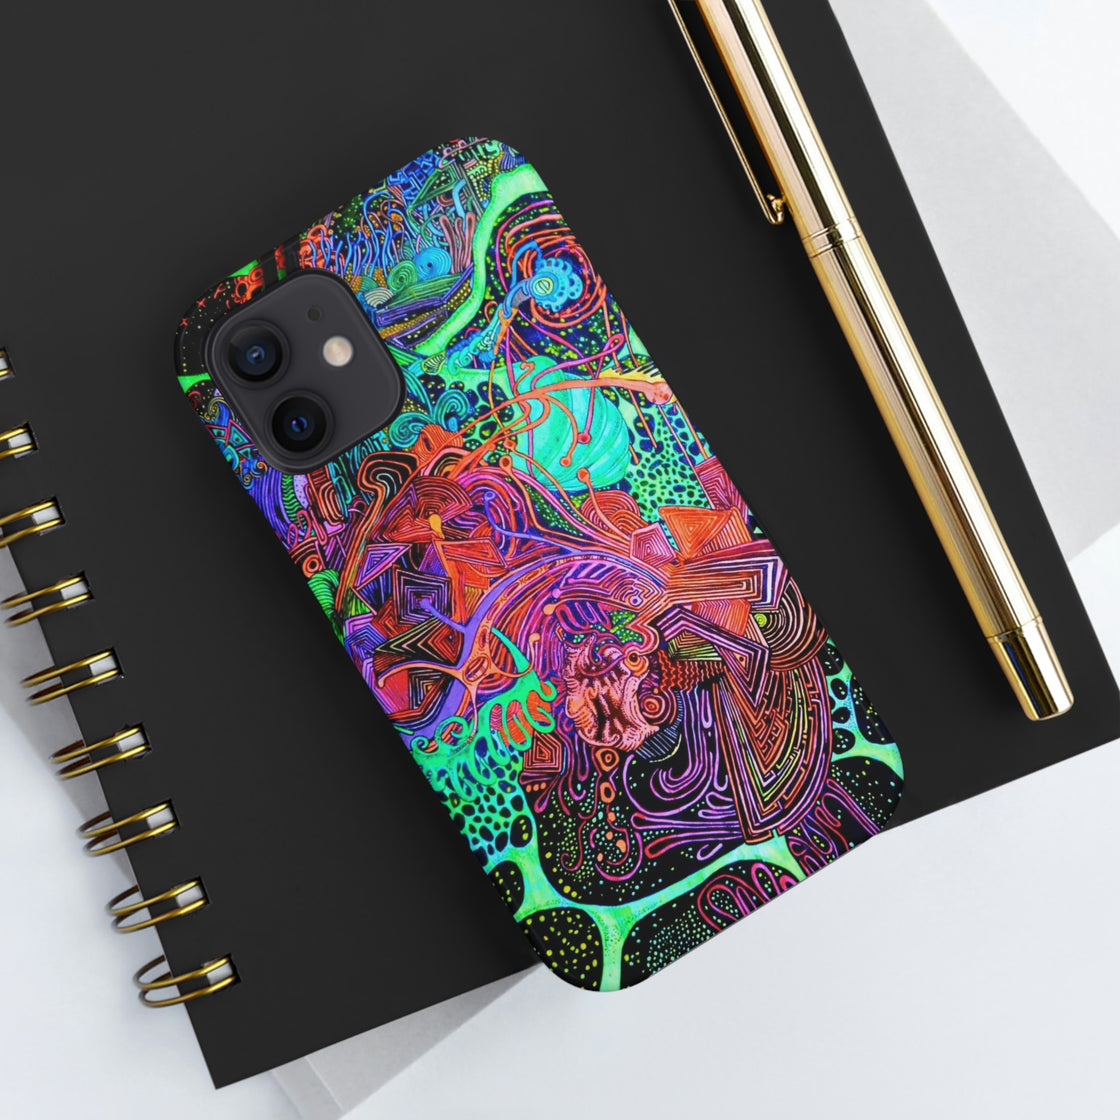 Trippy Tough iPhone Cases, Case-Mate IPhone